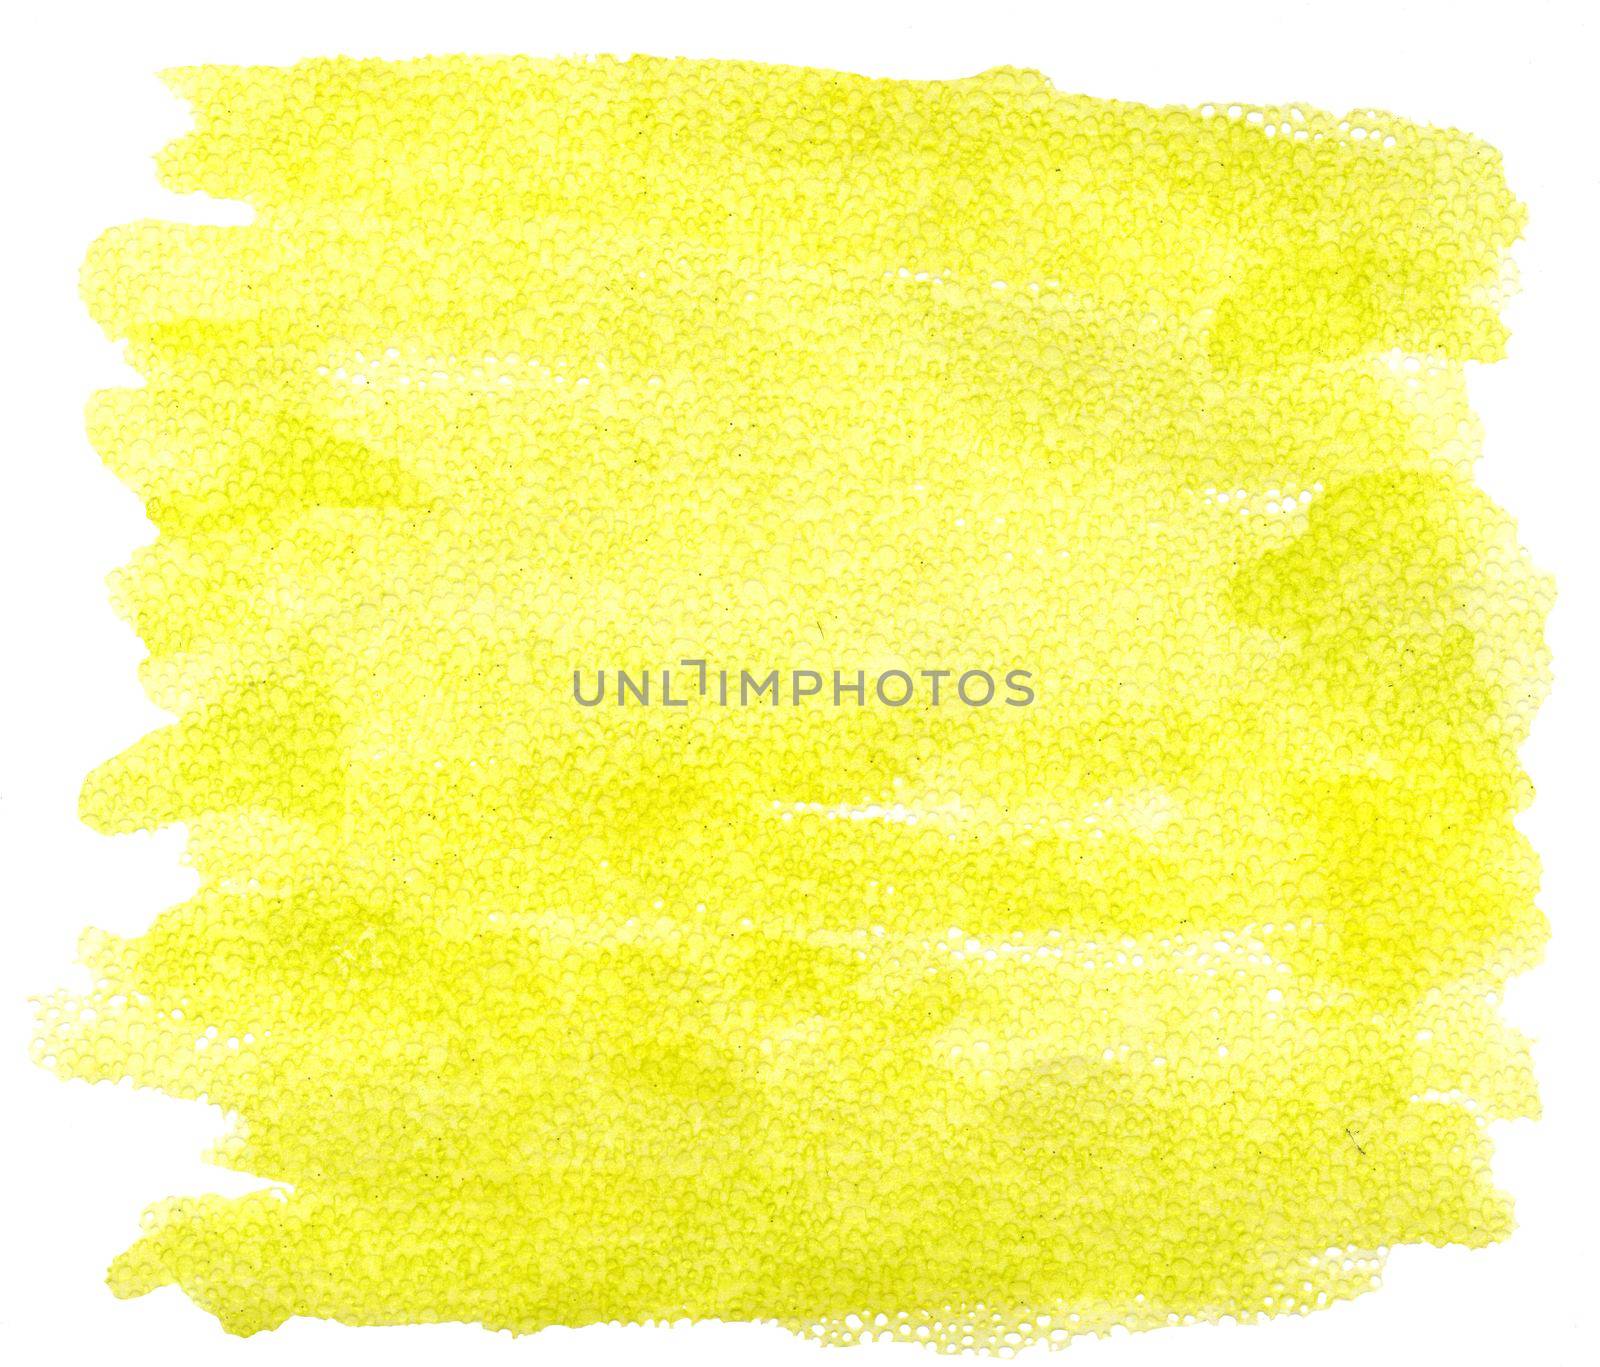 Coloured Watercolor Background by NataOmsk